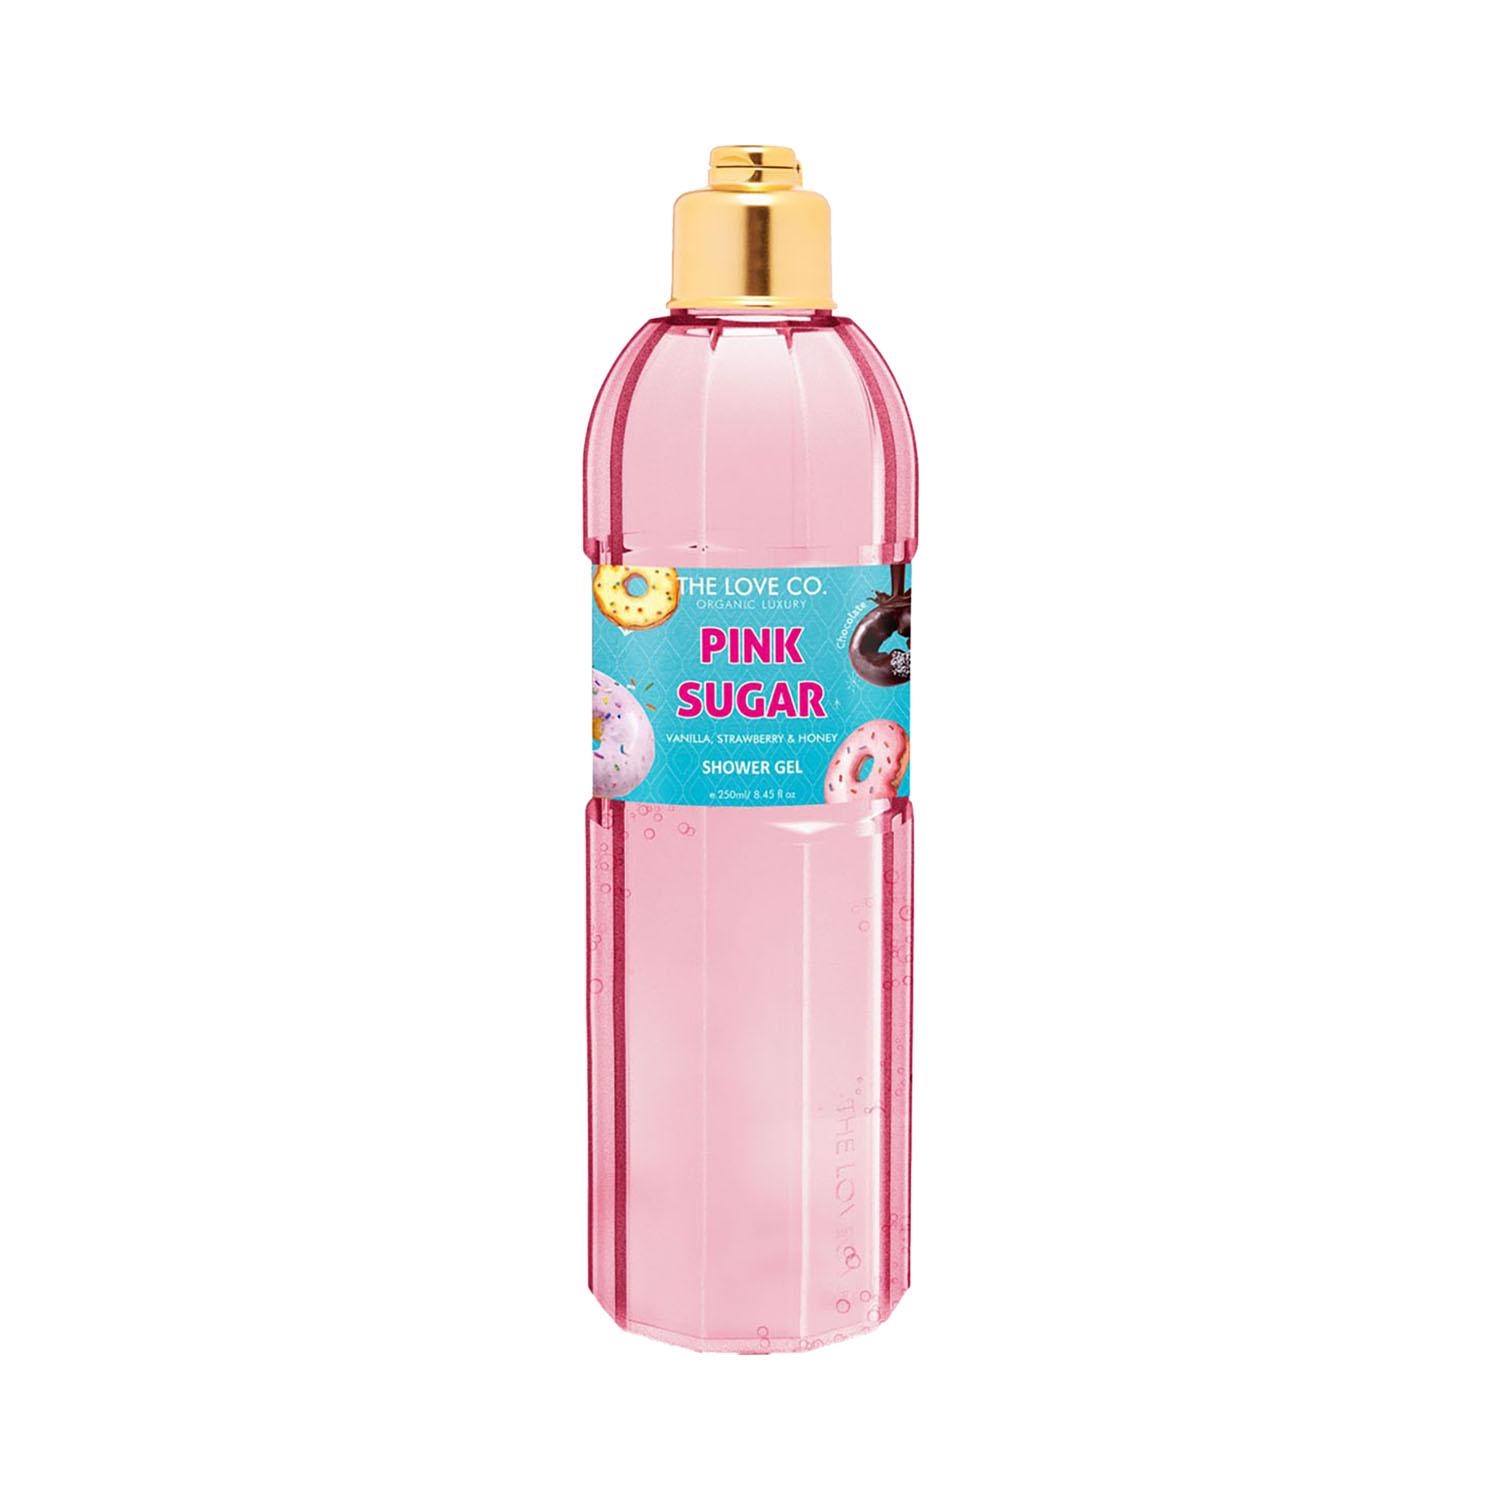 THE LOVE CO. | THE LOVE CO. Pink Sugar Shower Gel (250ml)